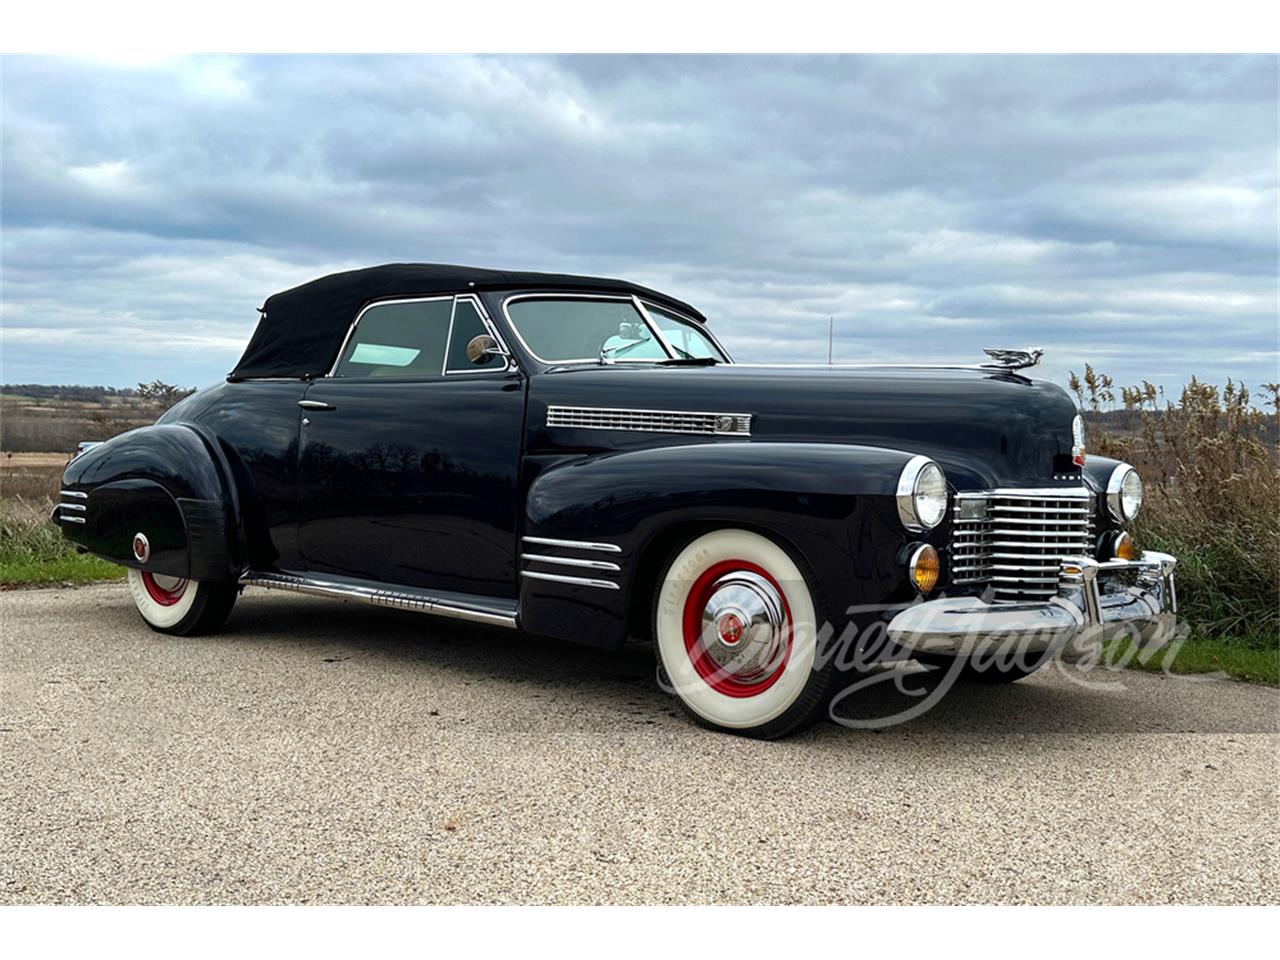 For Sale at Auction: 1941 Cadillac Series 62 in Scottsdale, Arizona for sale in Scottsdale, AZ